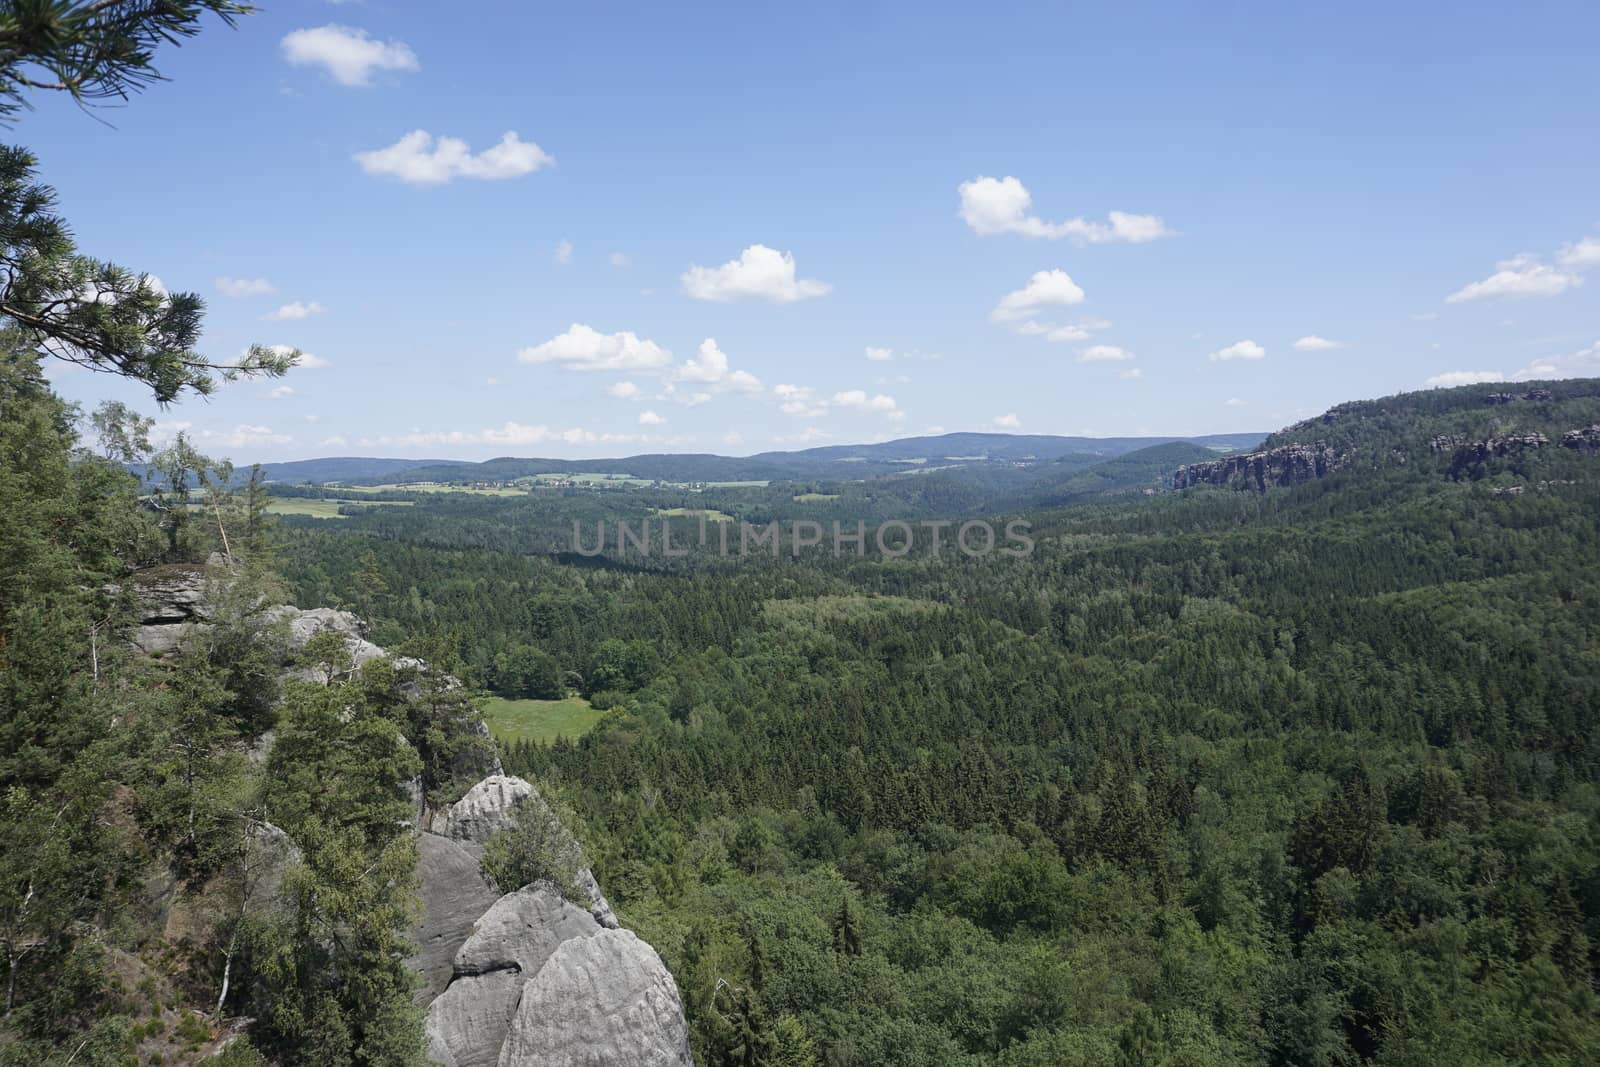 View from the Schrammsteine massif over beautiful hilly landscape